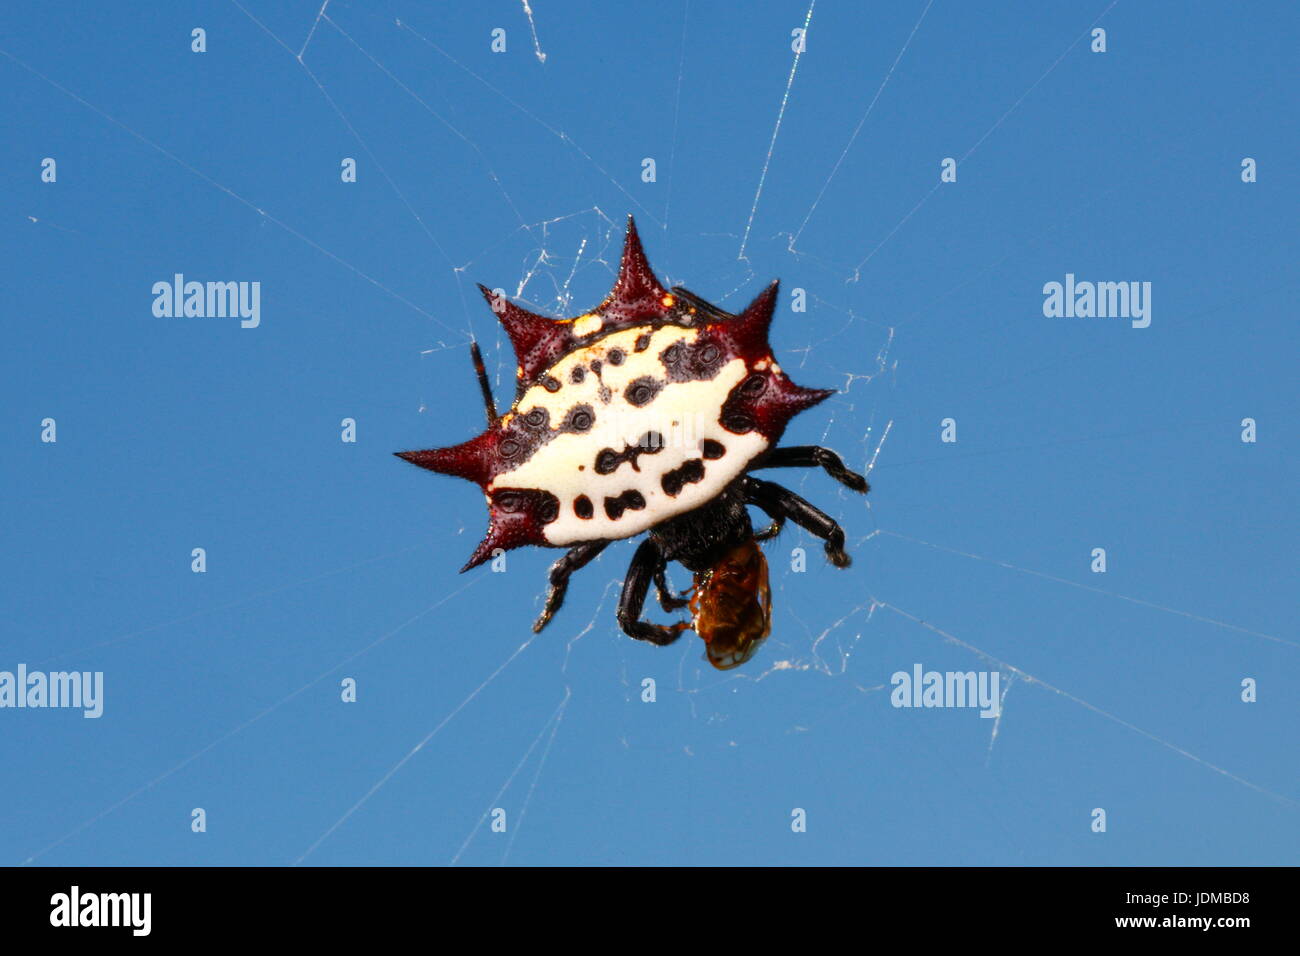 A spiny orb weaver spider, Gasteracantha cancriformis, on a web. Stock Photo